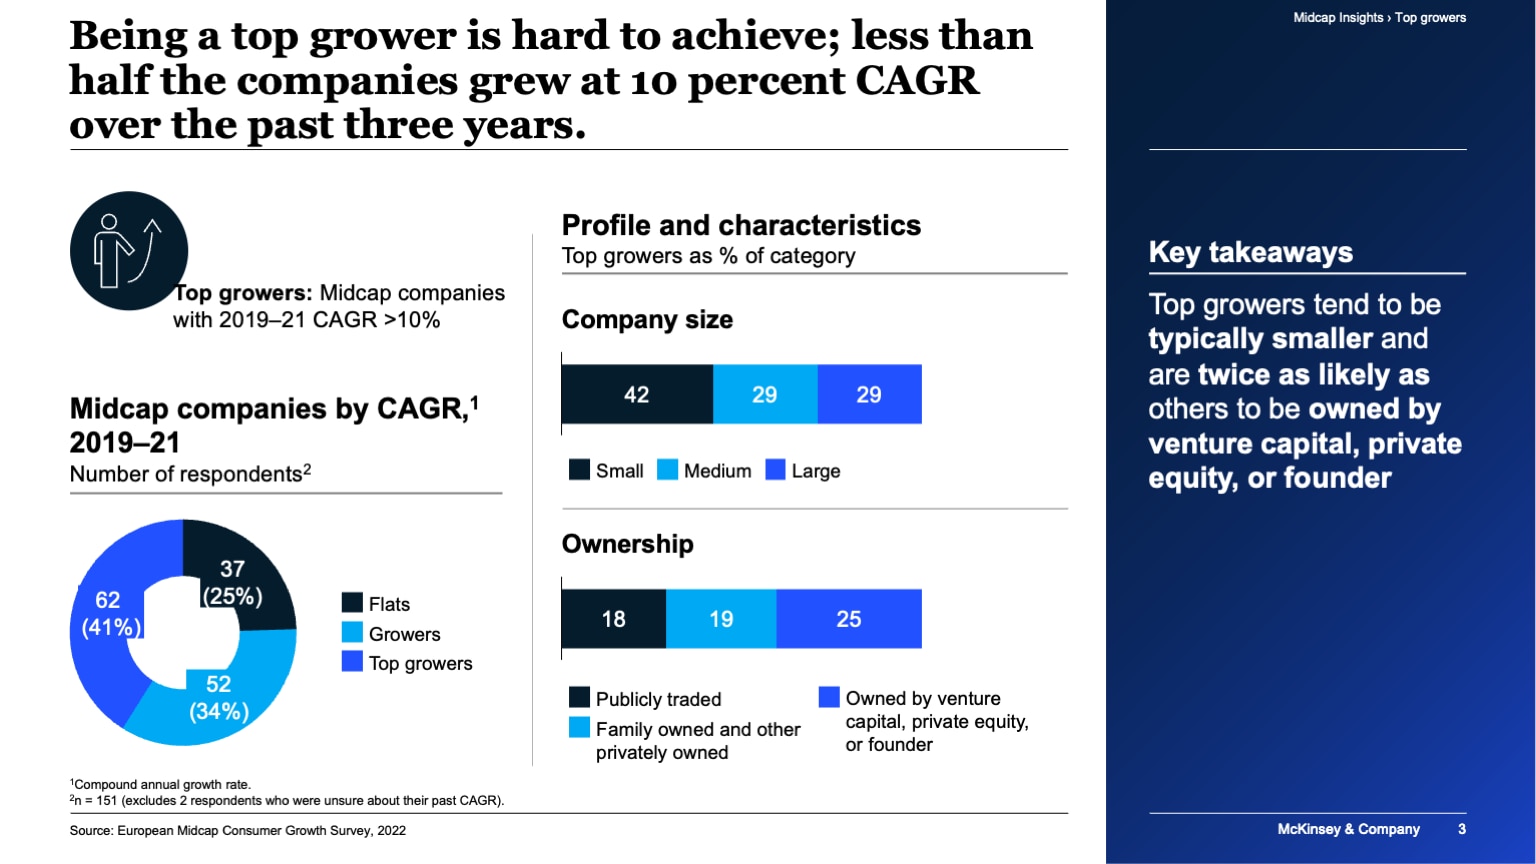 Being a top grower is hard to achieve; less than half the companies grew at 10 percent CAGR over the past three years.